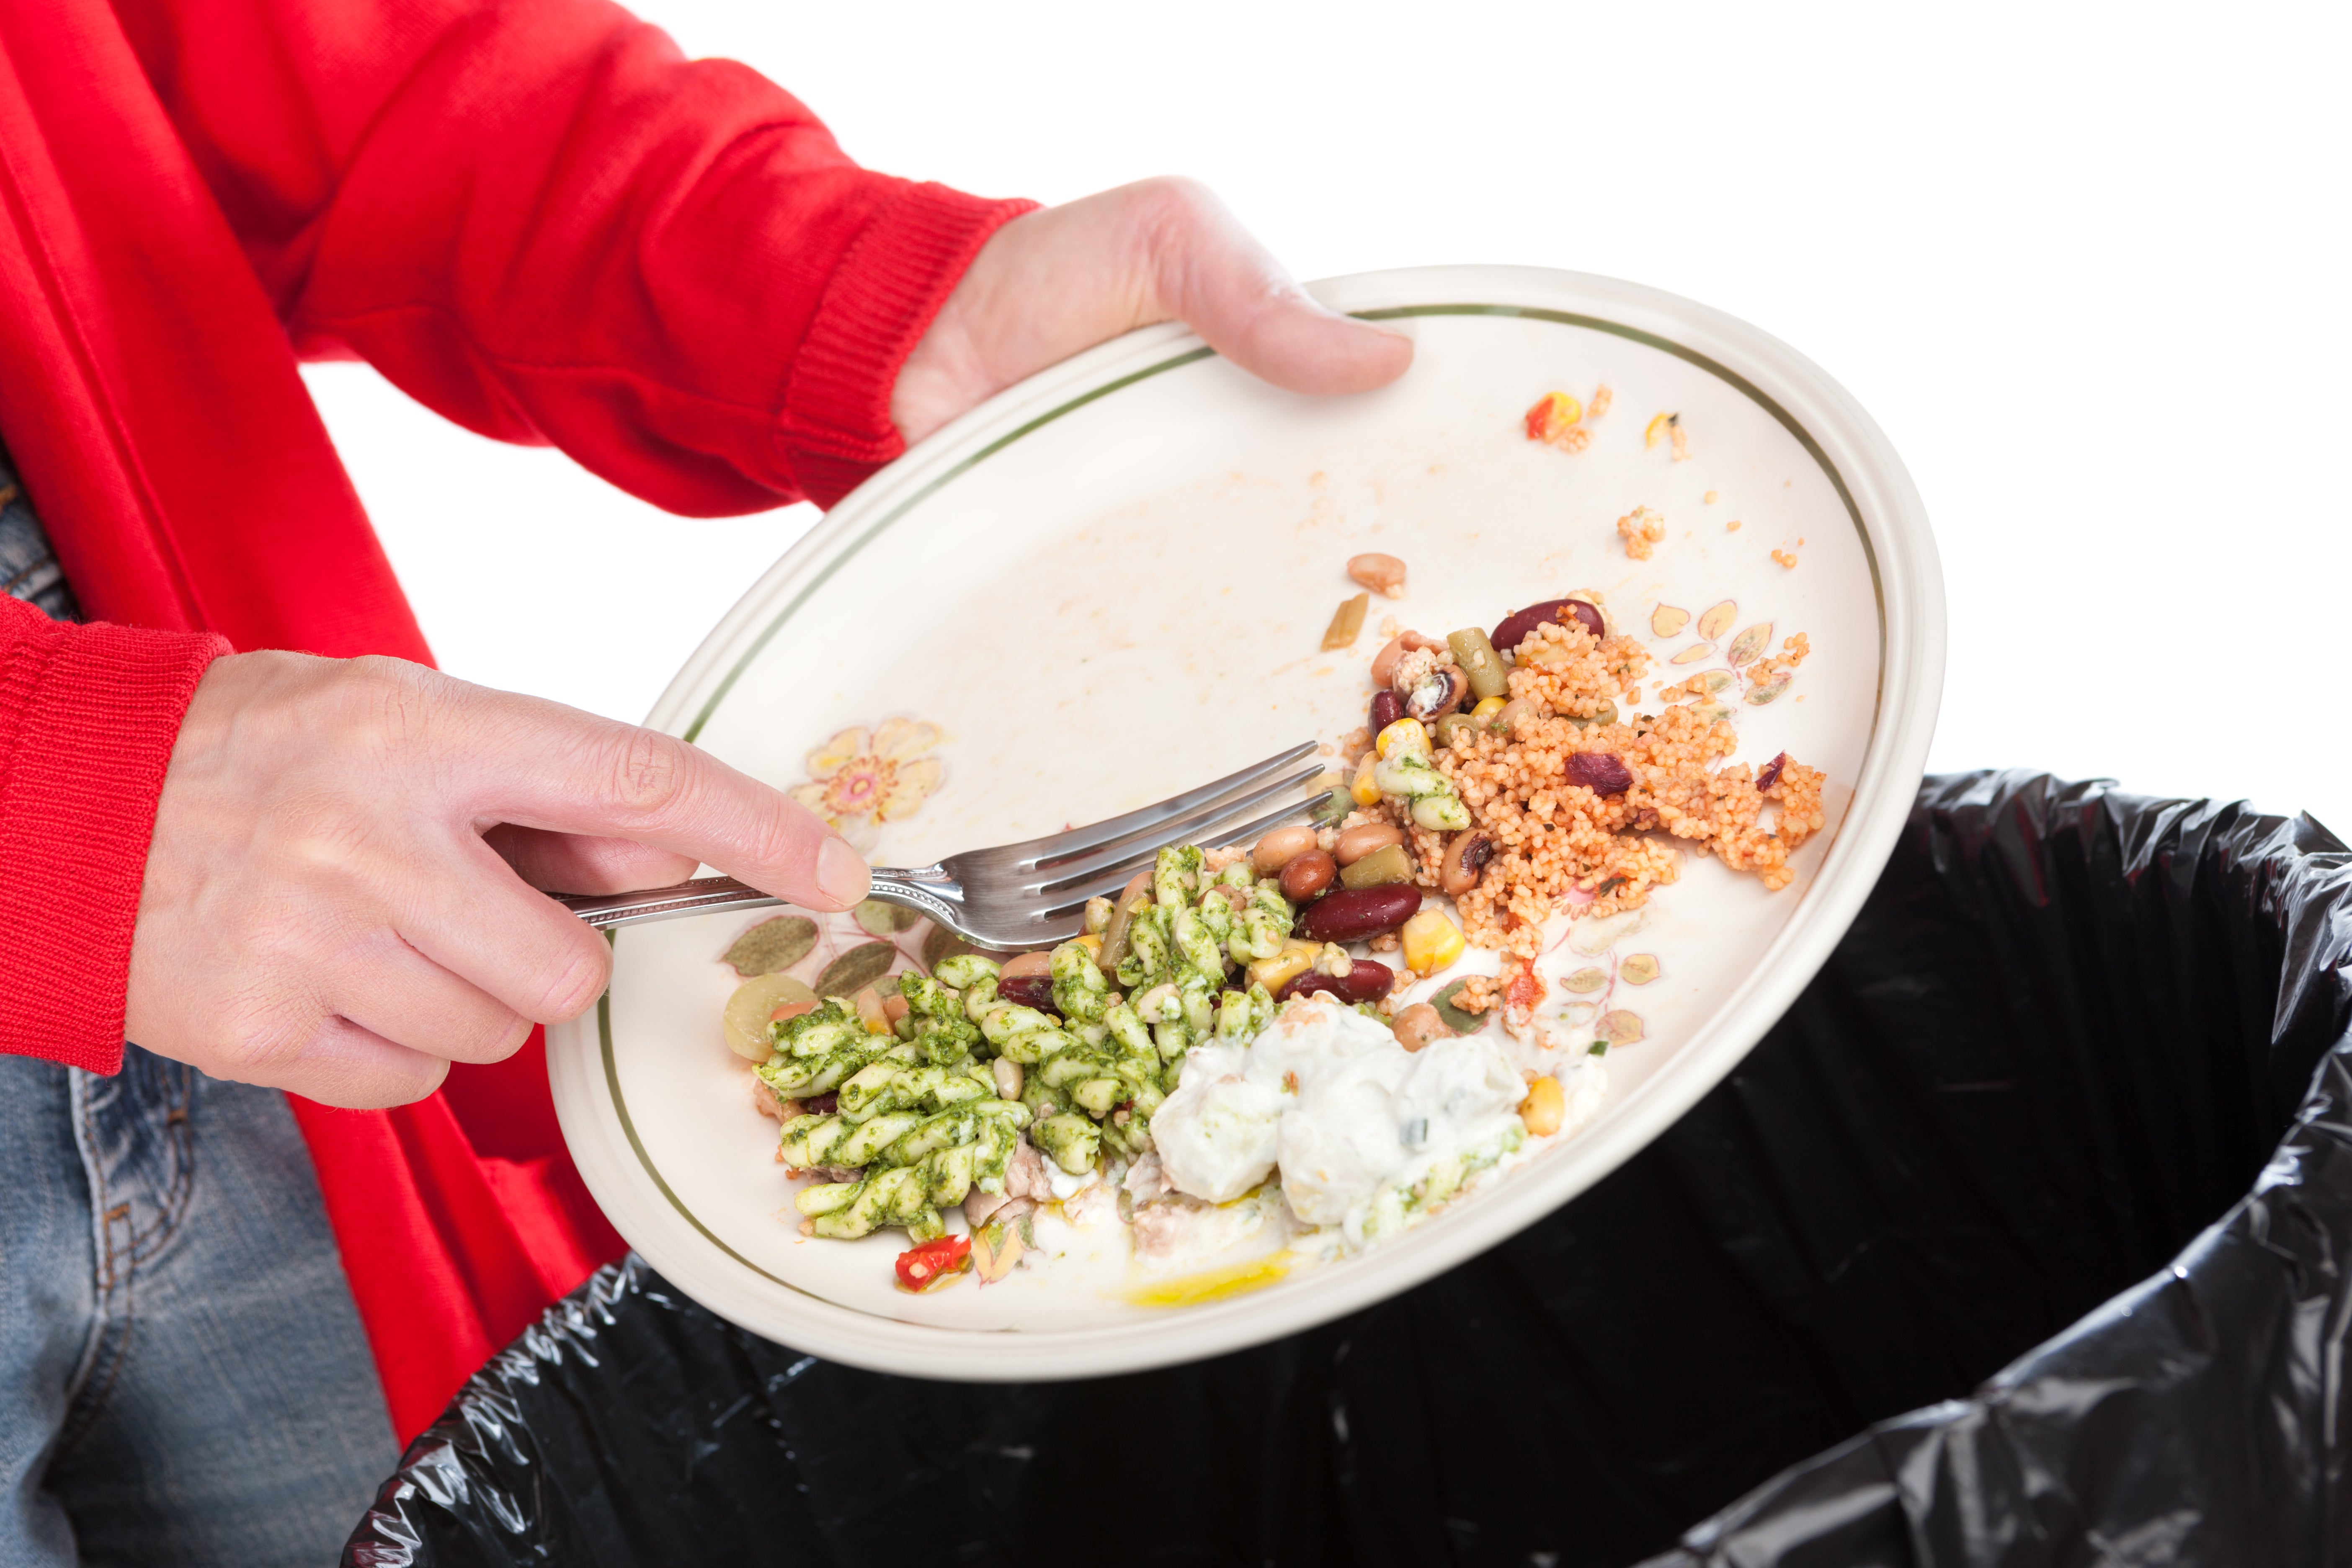 Four-fifths of Britons throw away uneaten food at least once per week